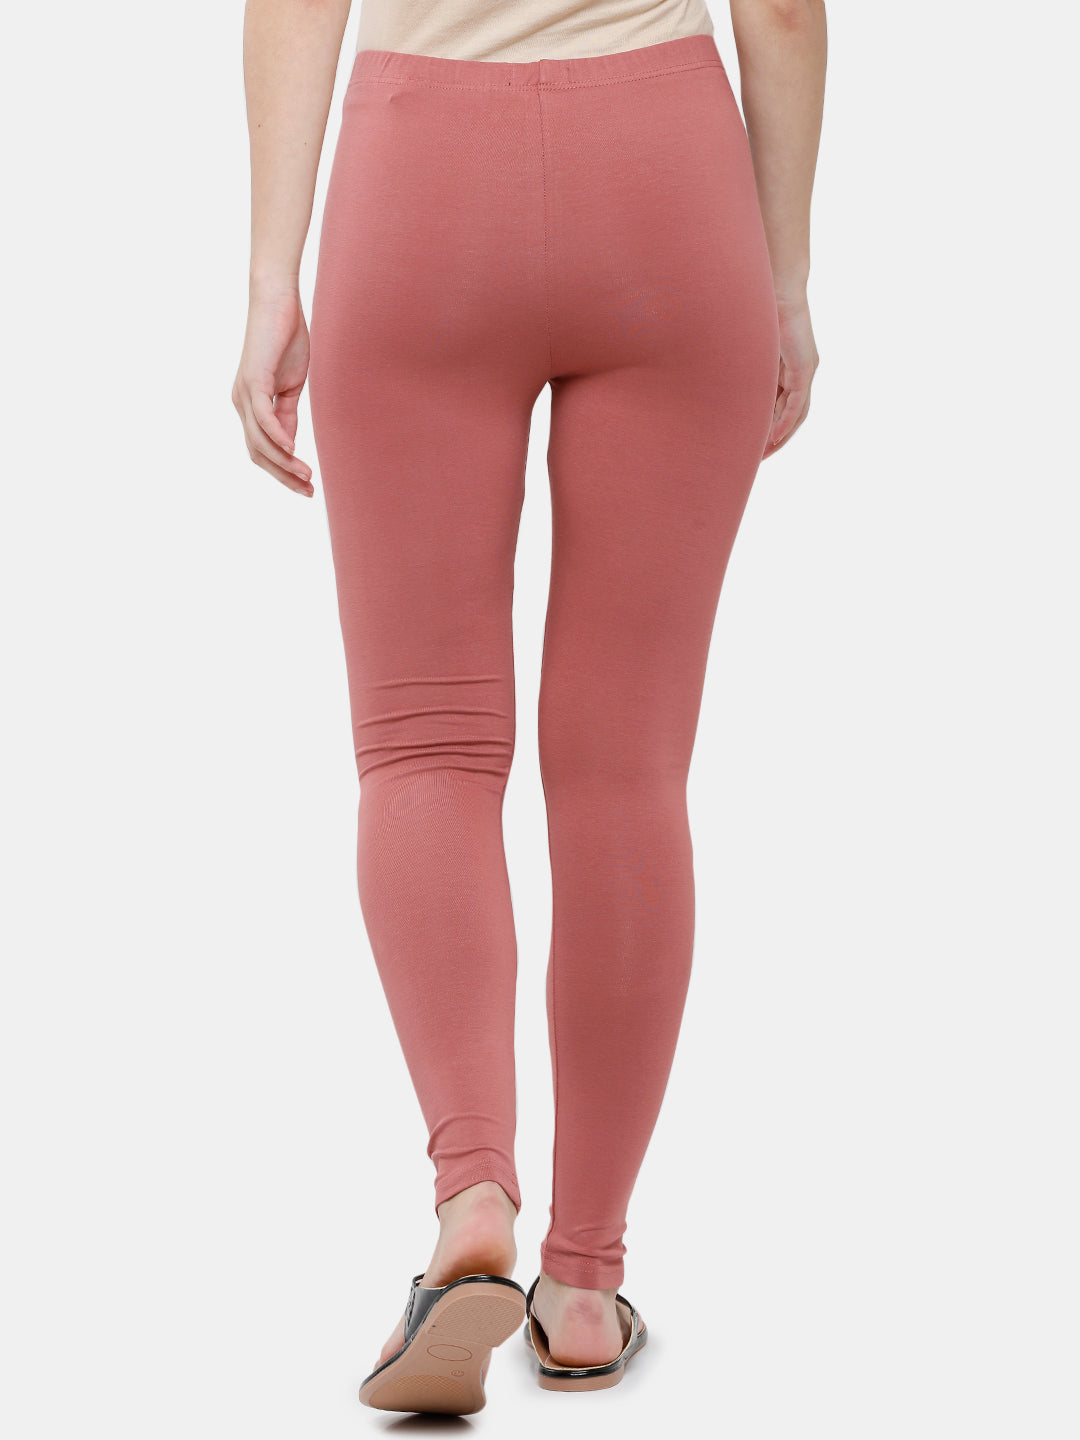 High-Rise 7/8 You're A Peach Leggings | Free People